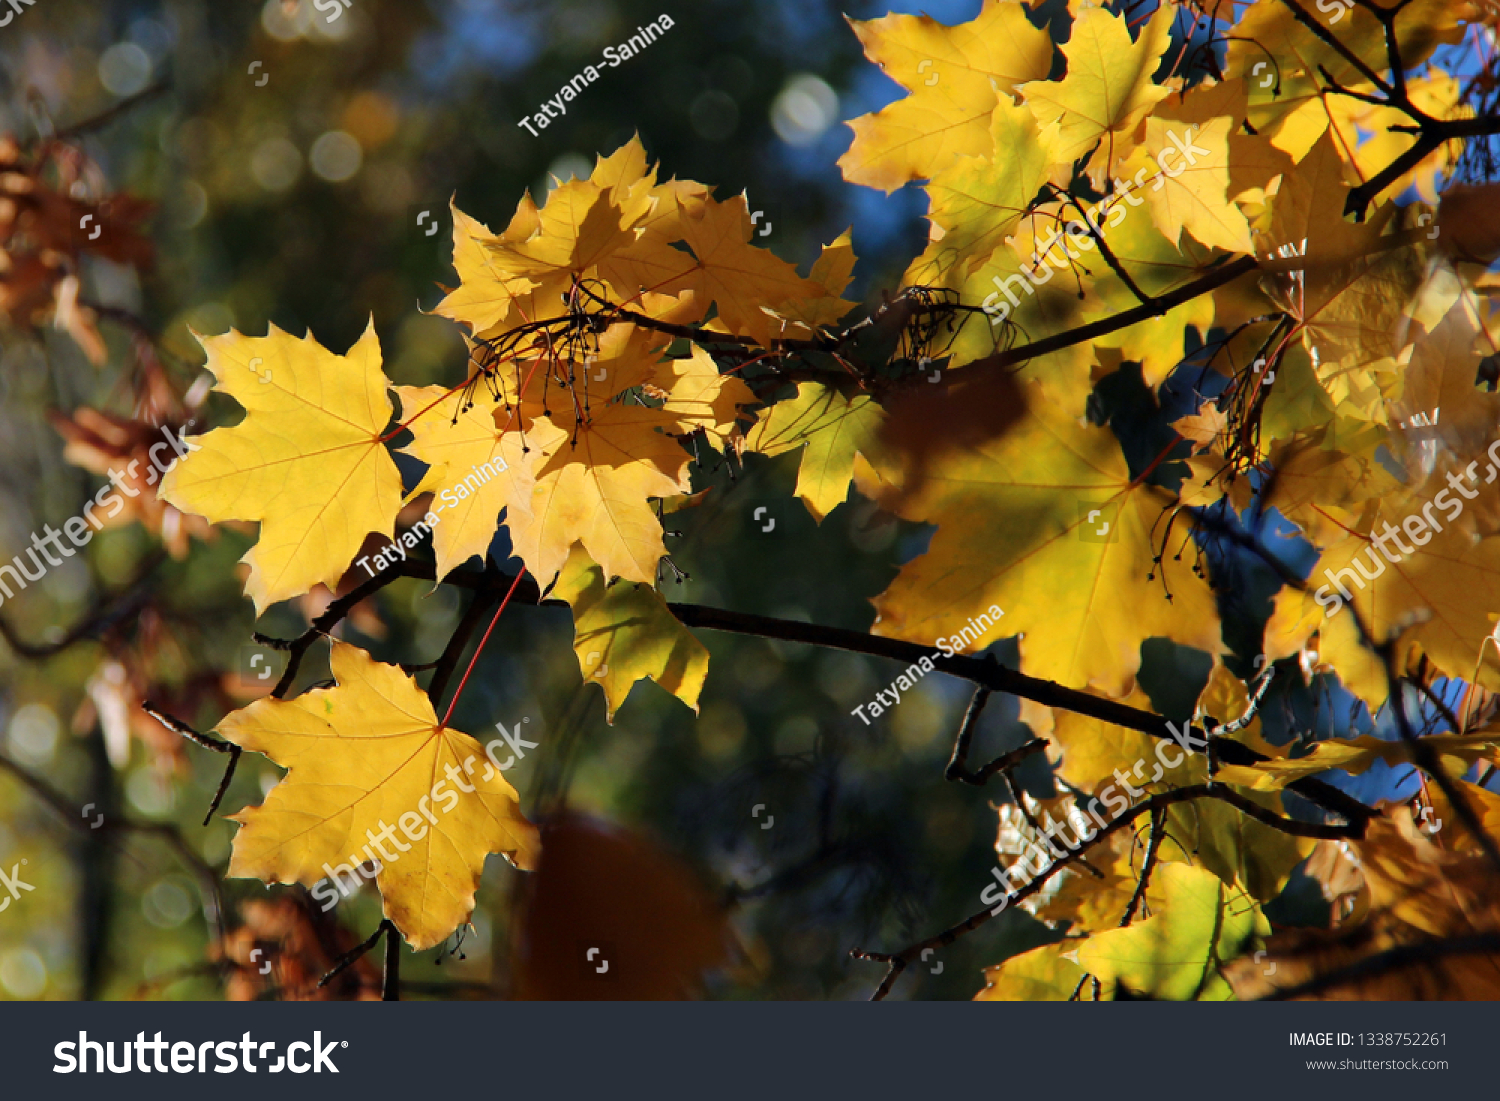 Leaves of Norway Maple or Acer platanoides in autumn against sunlight with bokeh background. Autumn colorful leaves with details. Sunny autumn maple  #1338752261